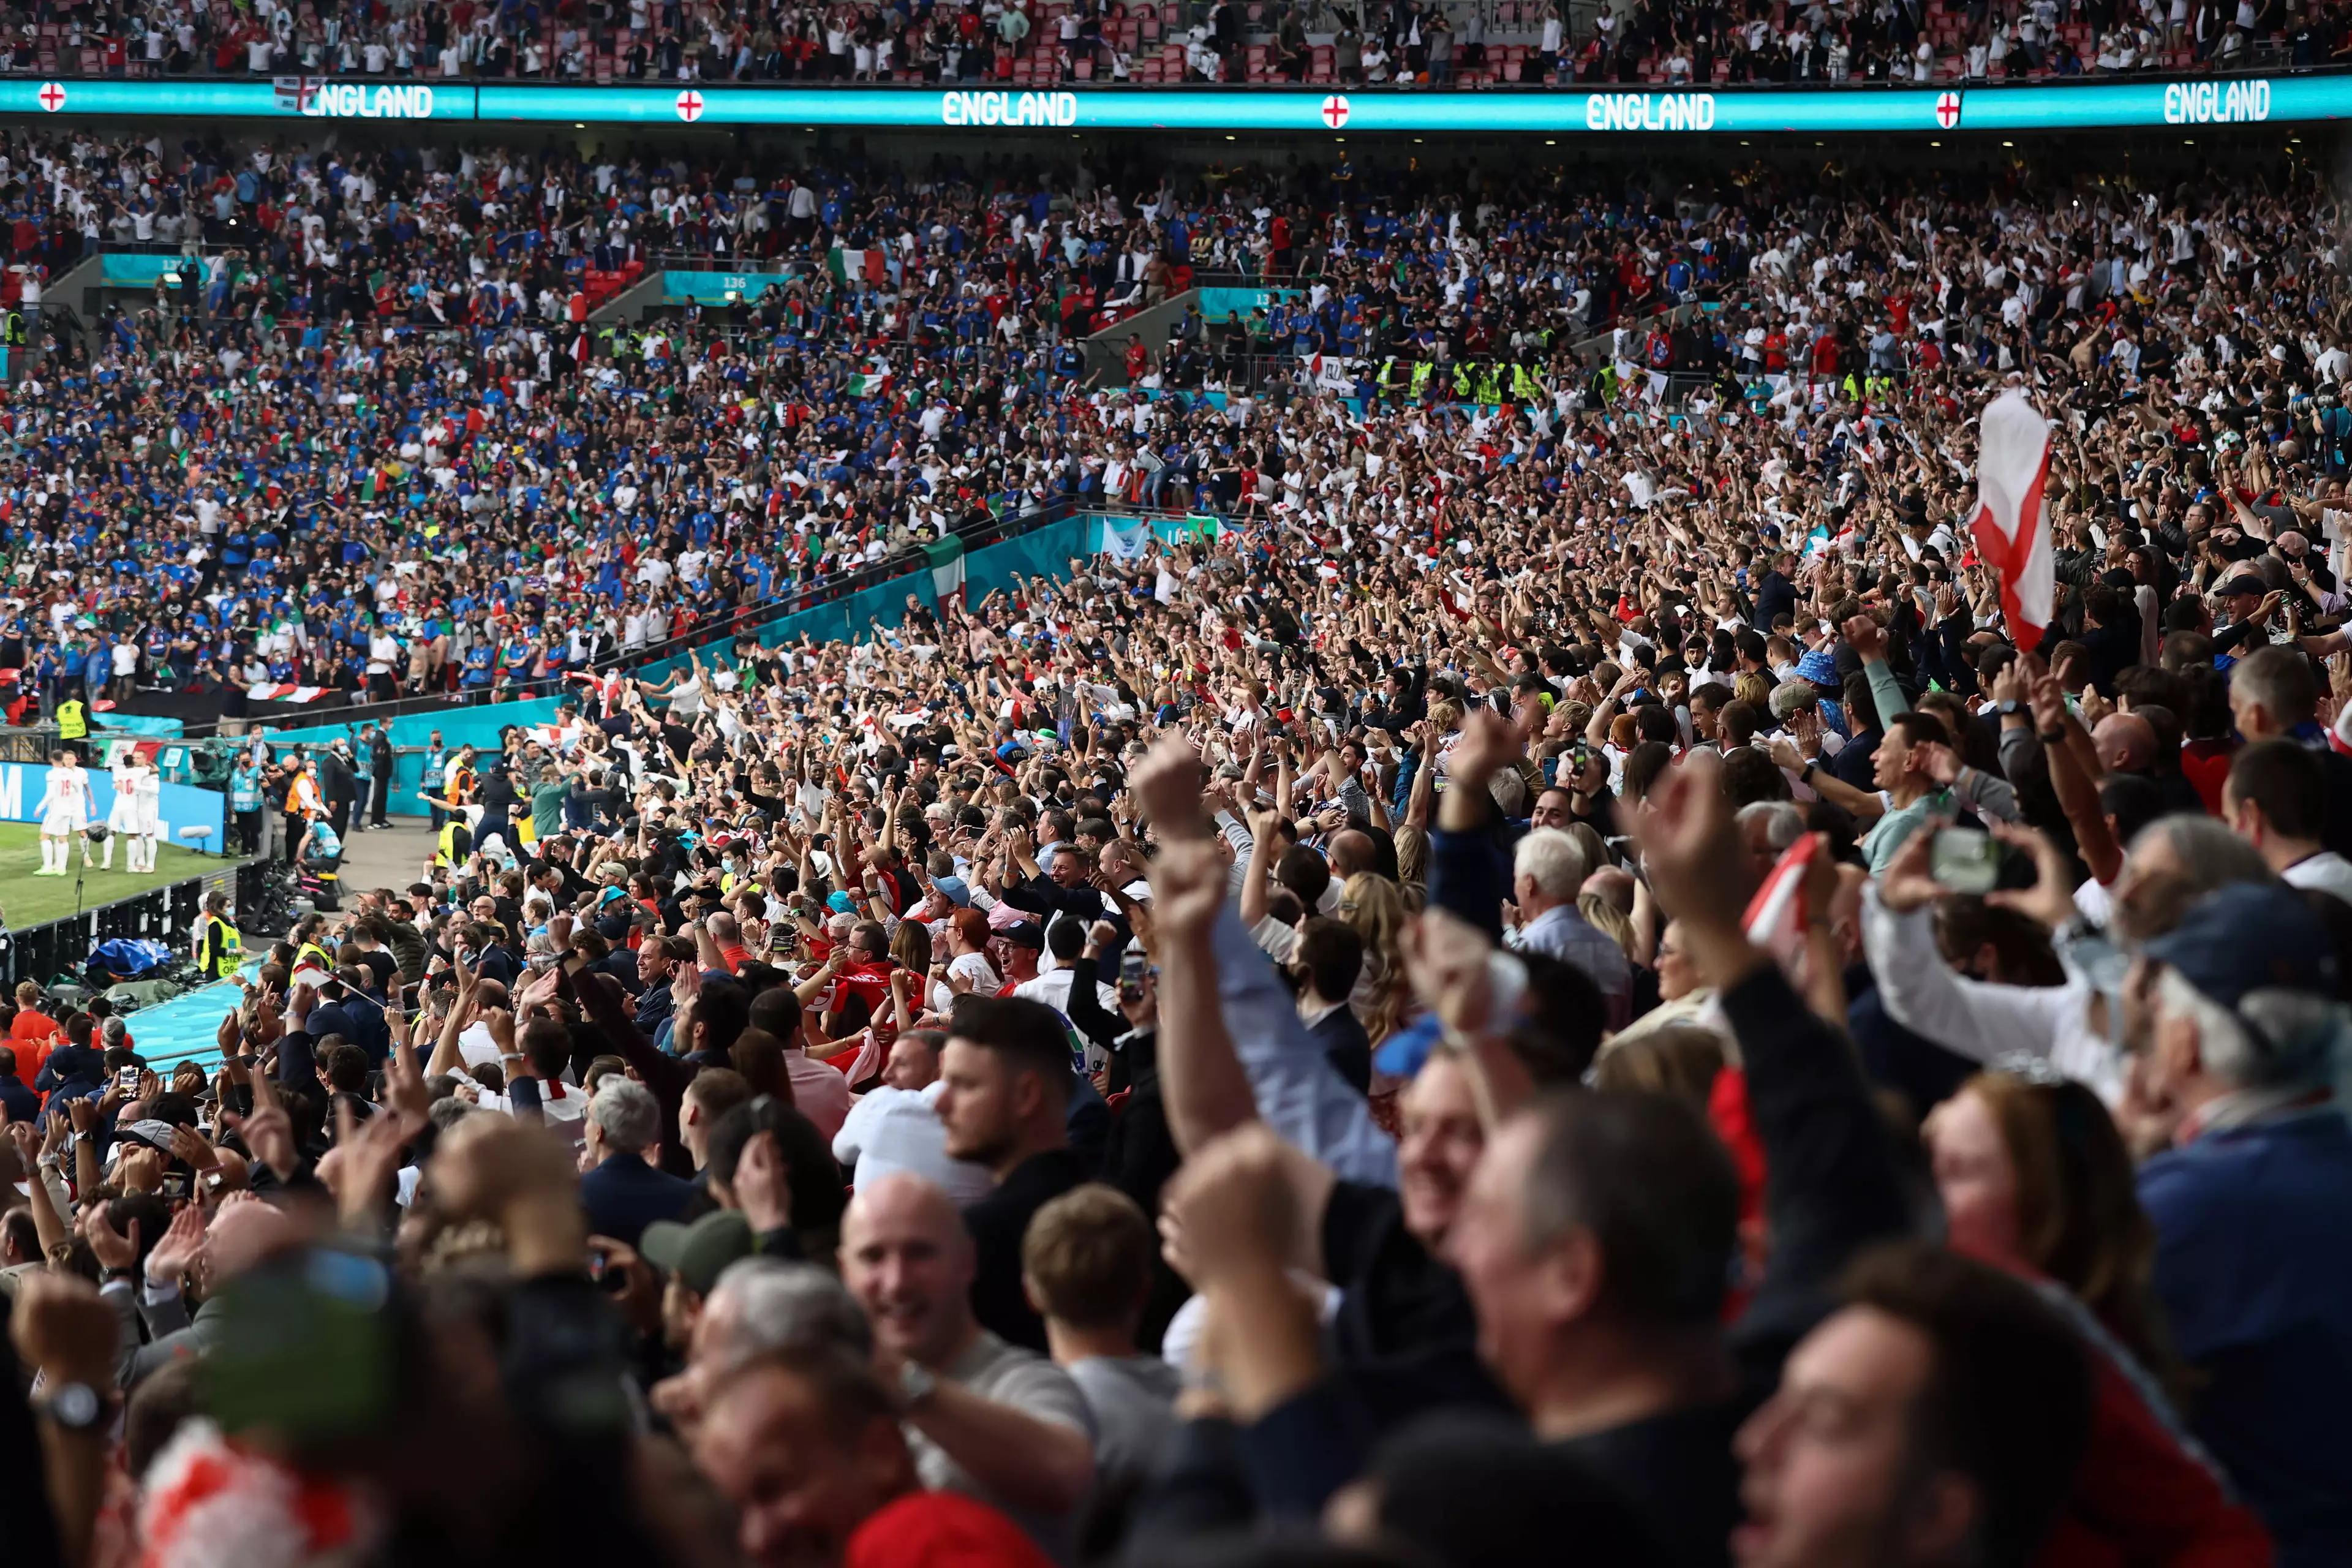 Wembley was fuller during the Euros and fans only needed a negative test 48 hours before the game. Image: PA Images